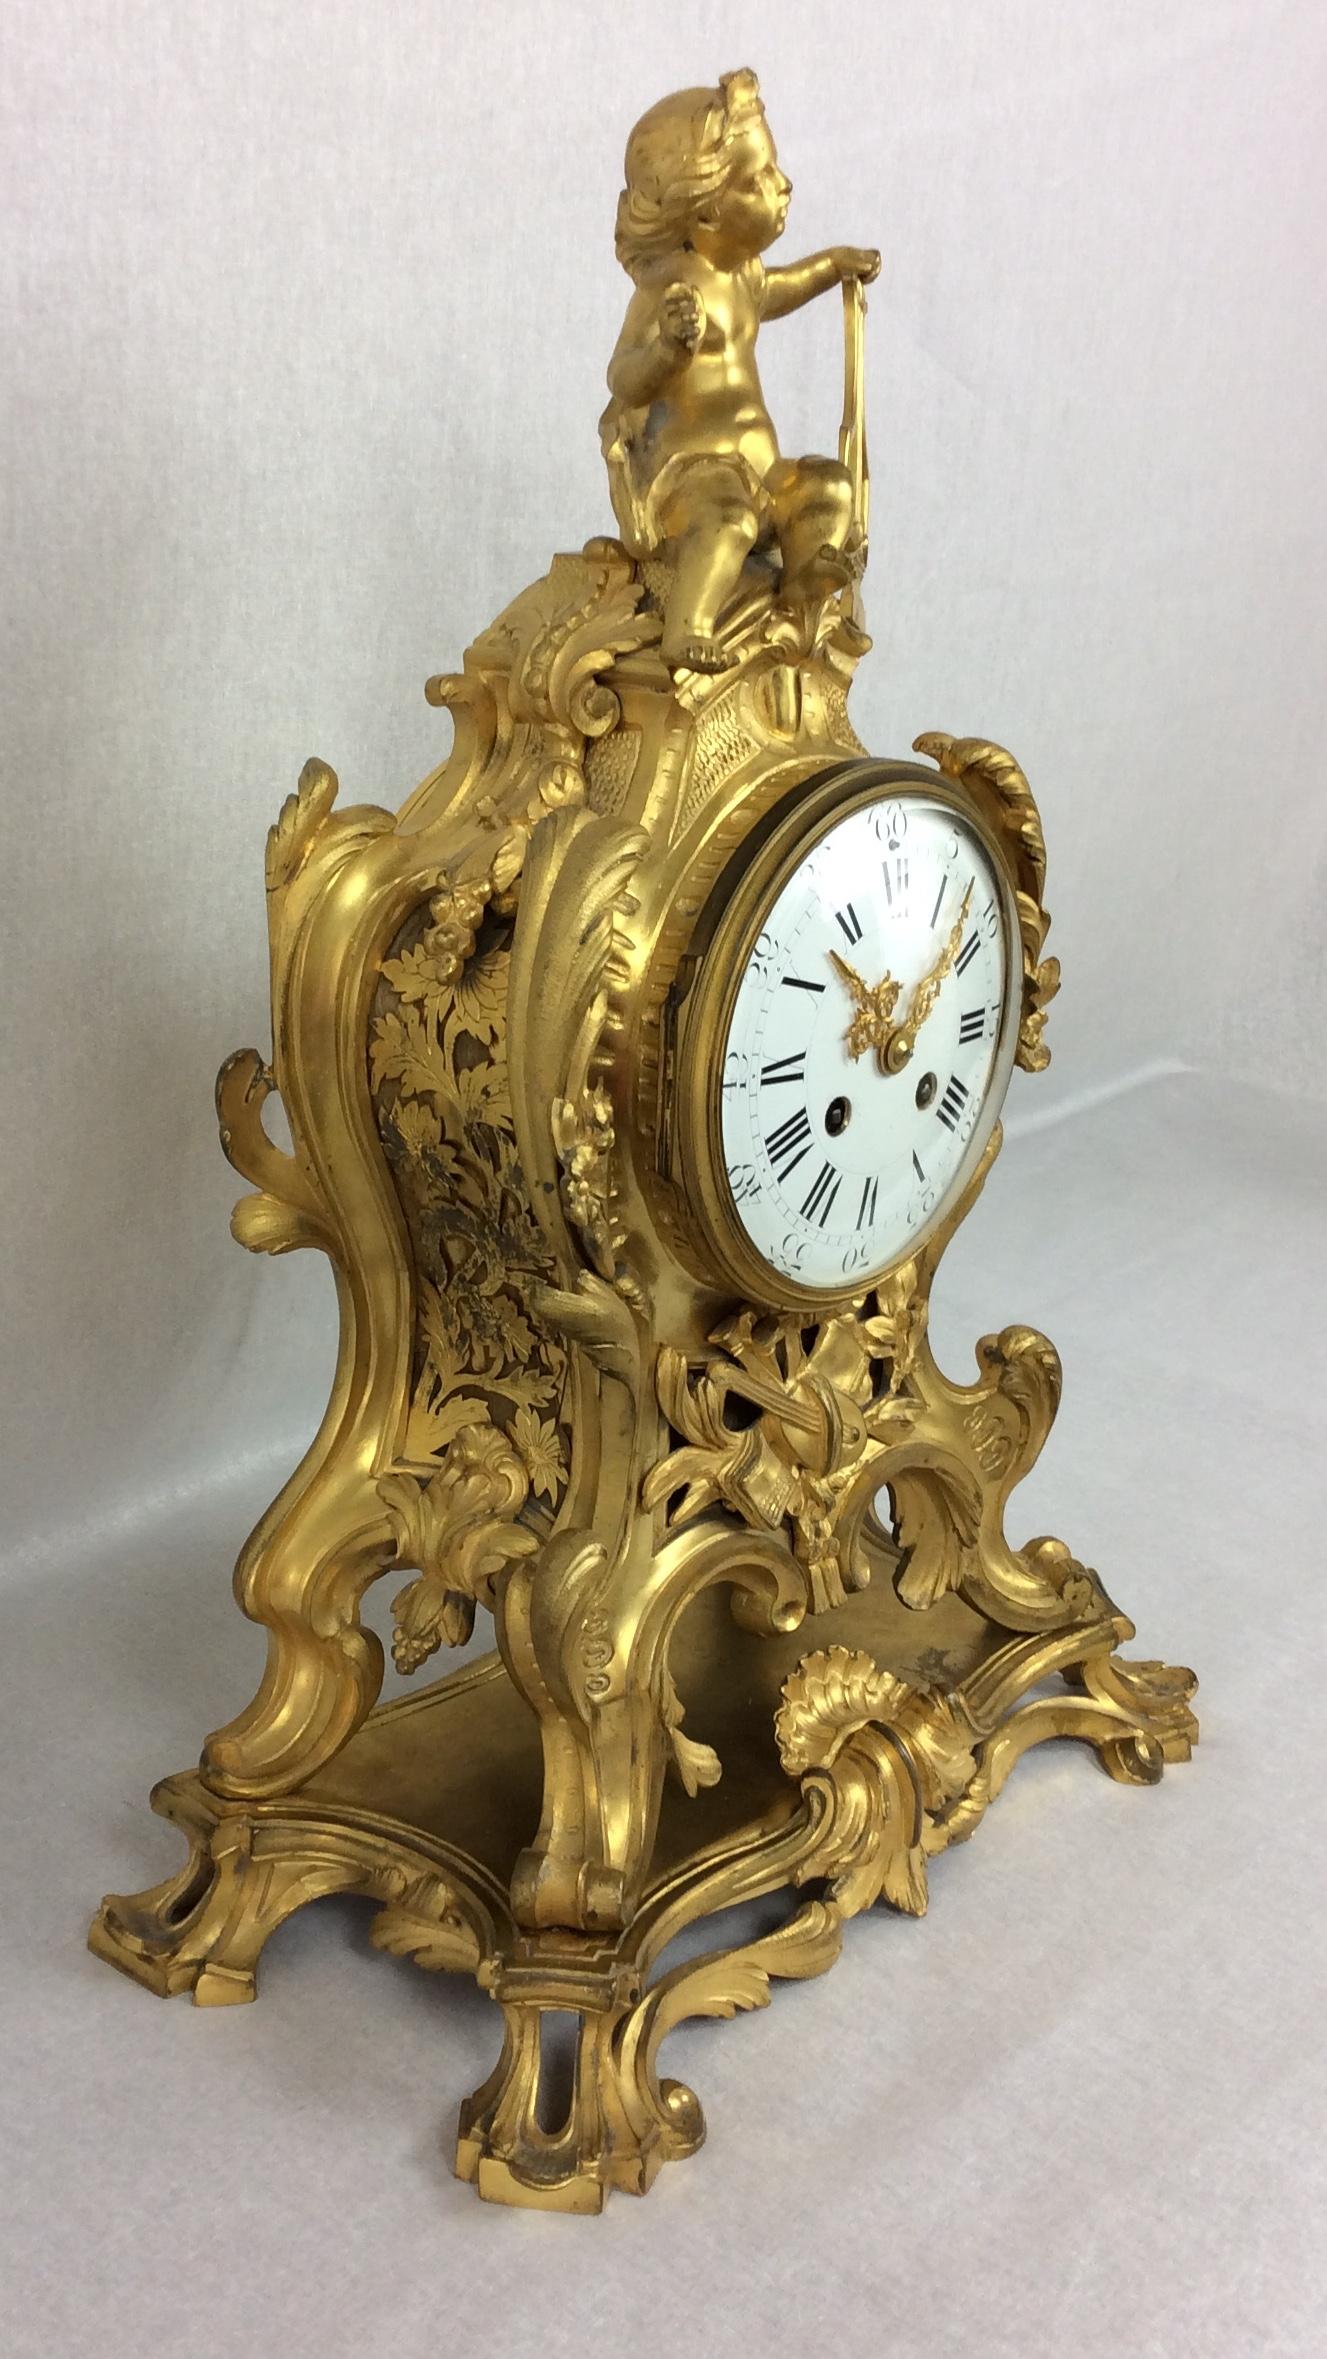 Hand-Crafted French Rococo Ormolu Mantel Clock Set After Meissonnier, Samuel Marti  For Sale